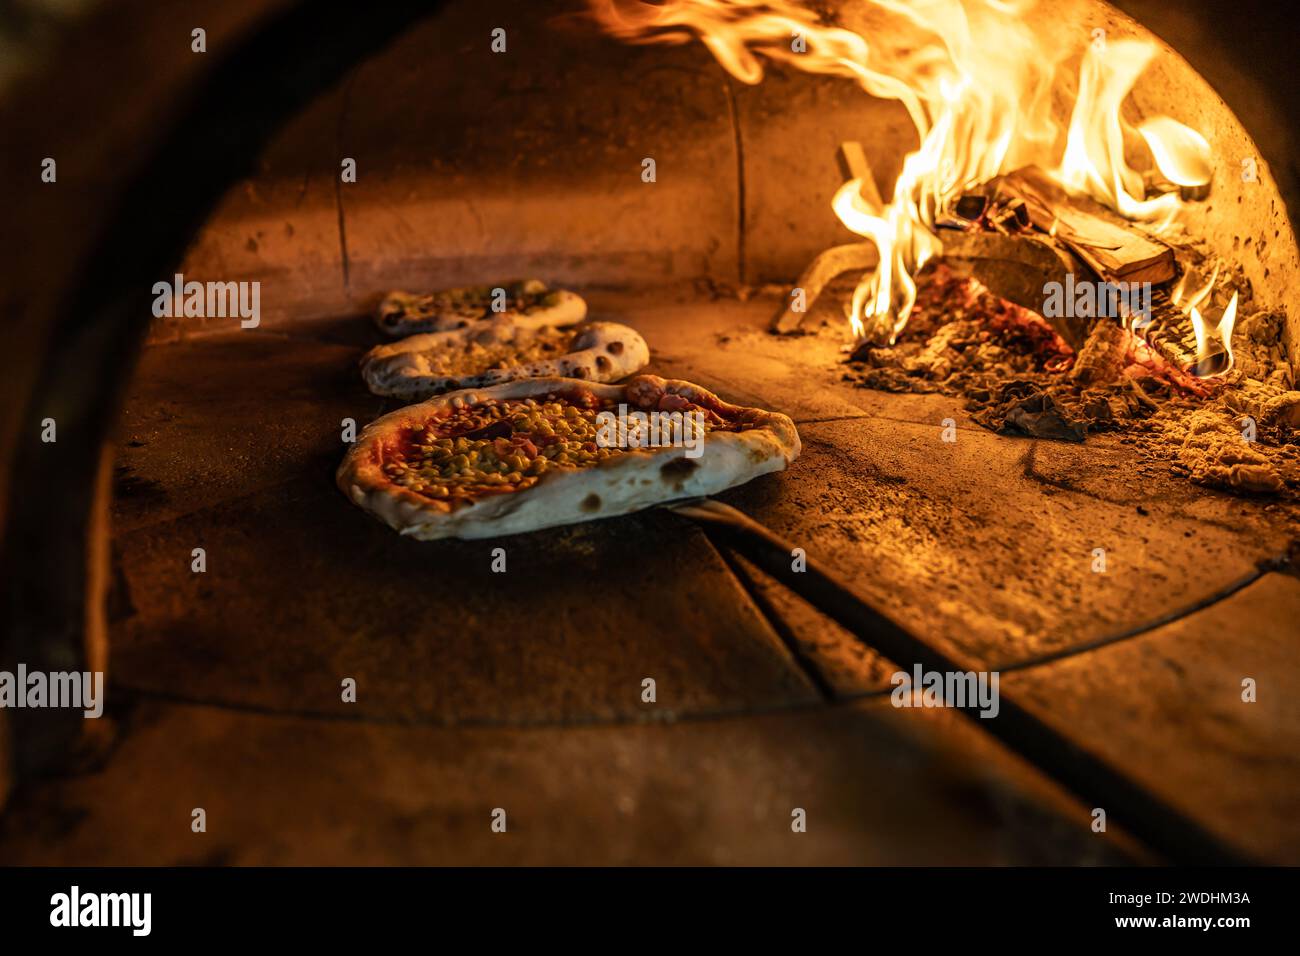 Traditional oven for baking pizza with burning wood and shovel. The cook rotates the pizza in the oven to ensure even baking. Stock Photo